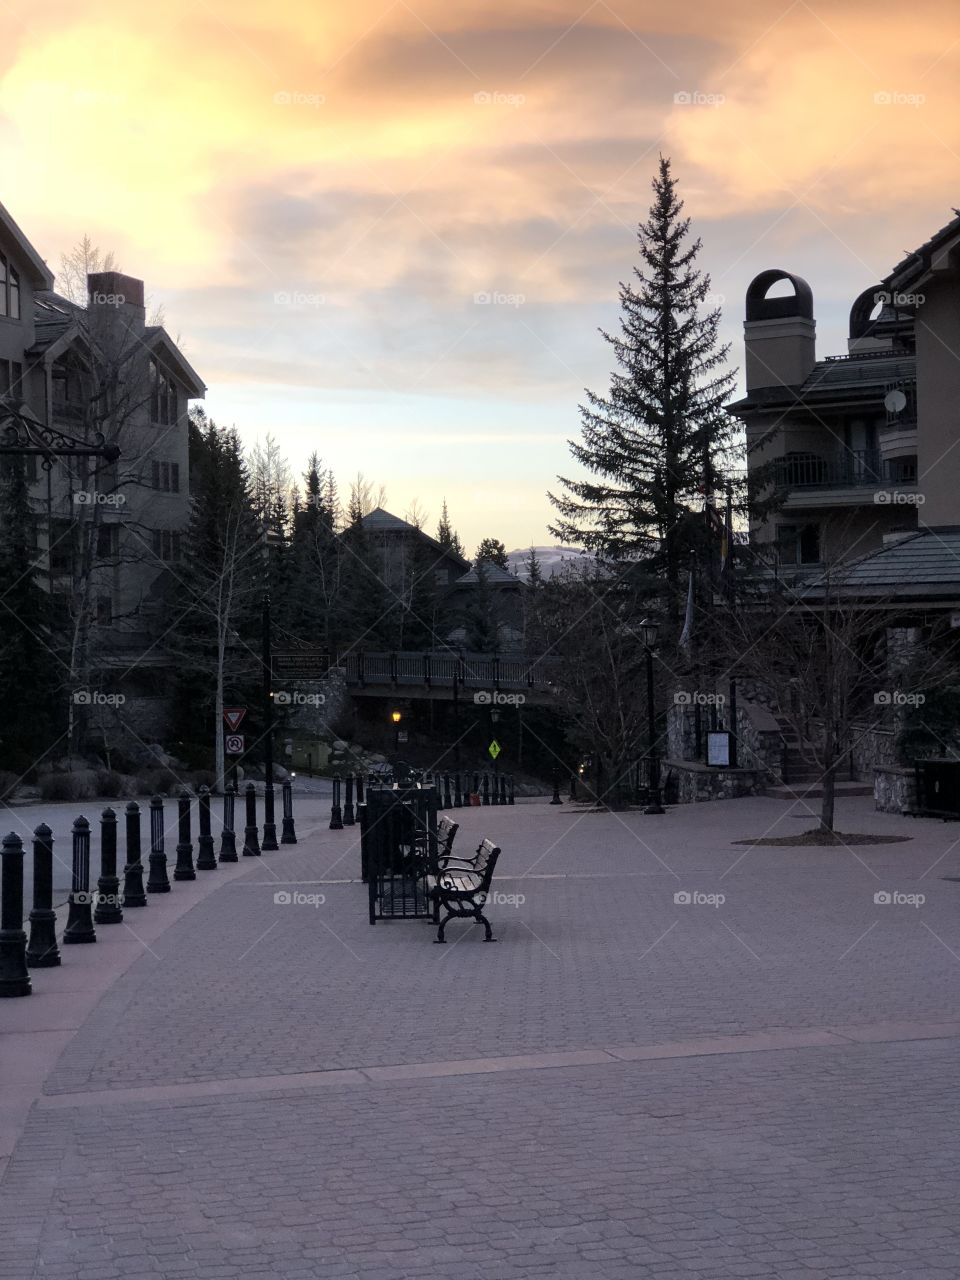 VIEWS FROM MOUNTAIN VILLAGE VAIL 2018